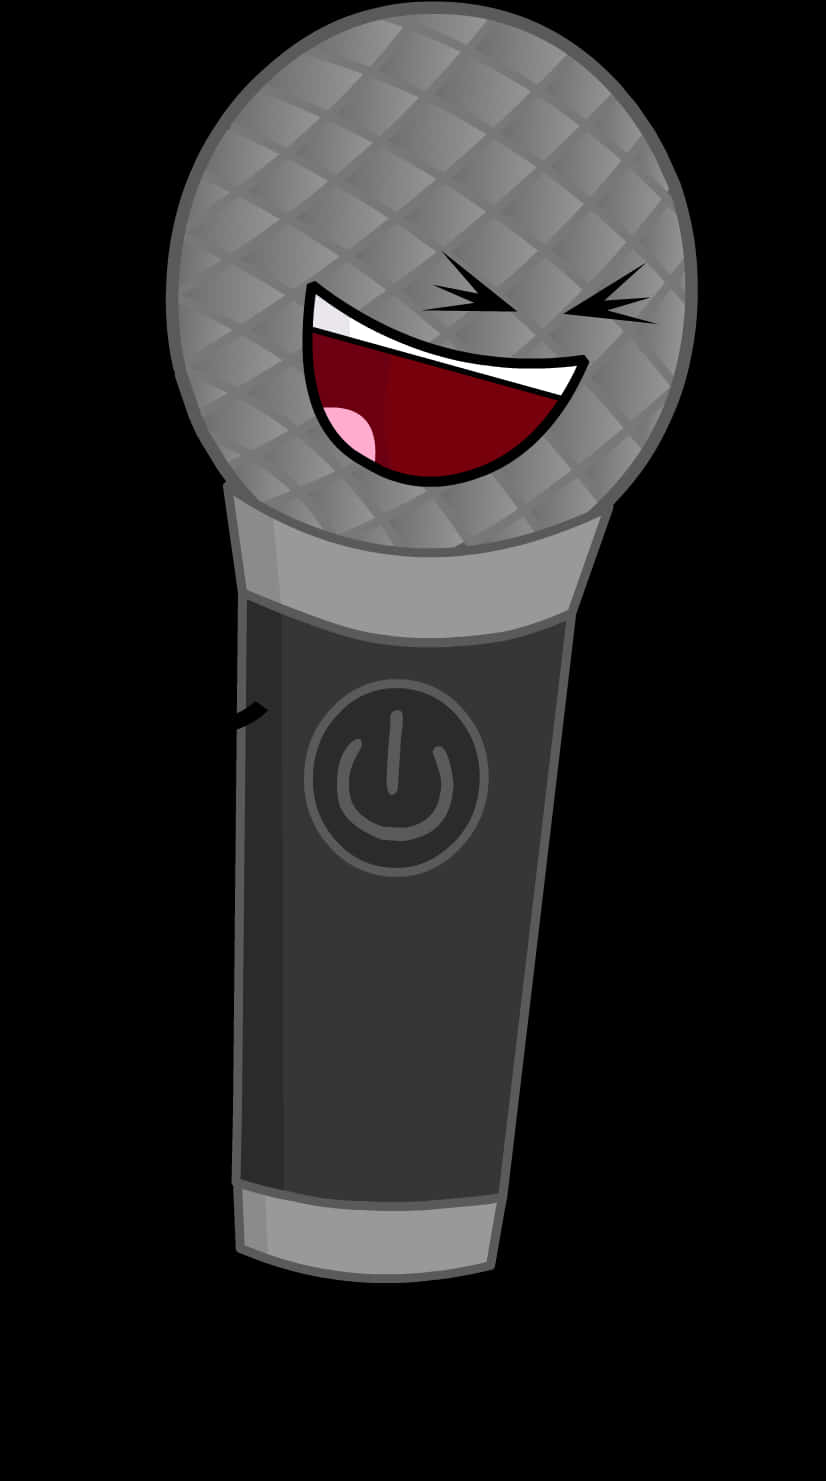 Animated Microphone Character Smiling PNG image